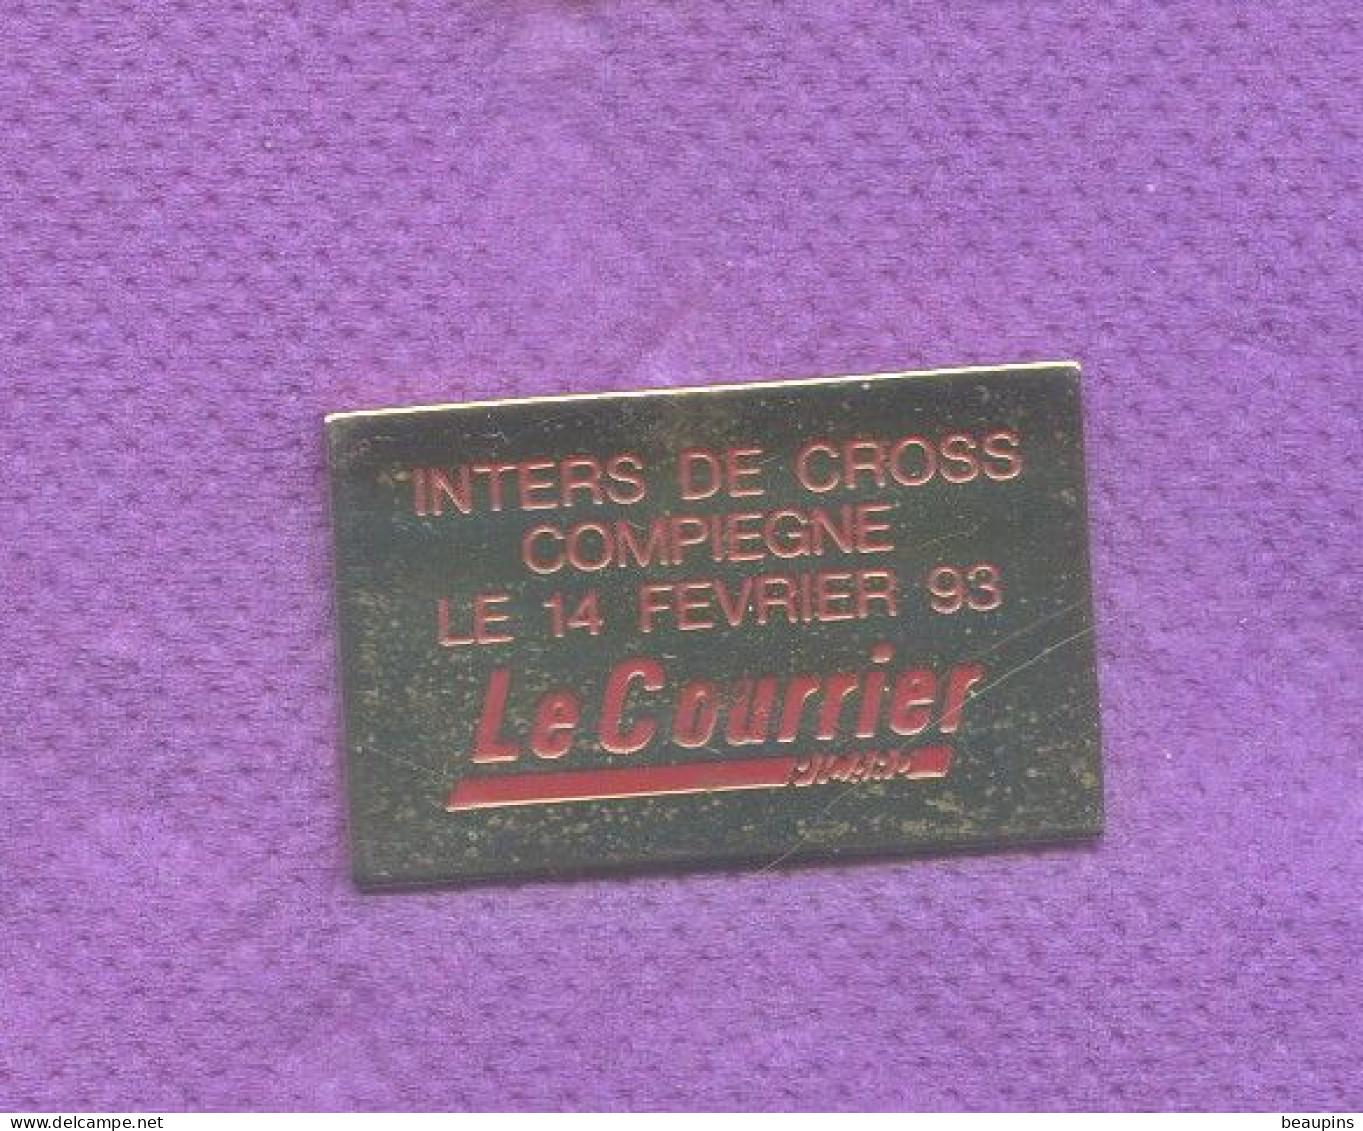 Rare Pins Media Presse Journal Le Courrier Picard Inters Cross Compiegne 1993 N610 - Mass Media